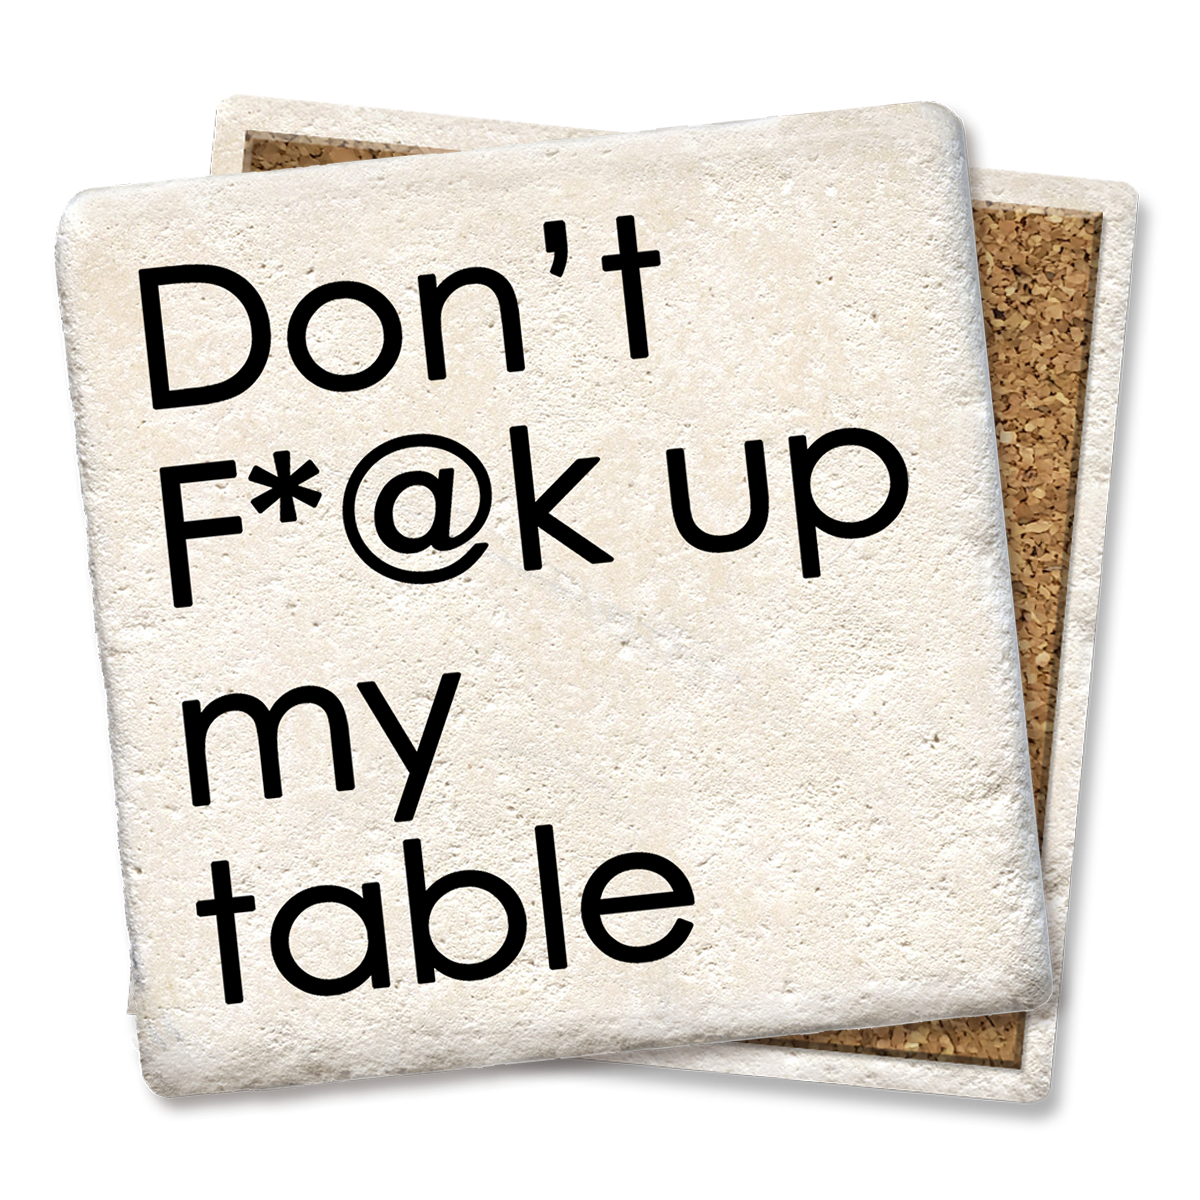 Don't F*@k up my table coaster